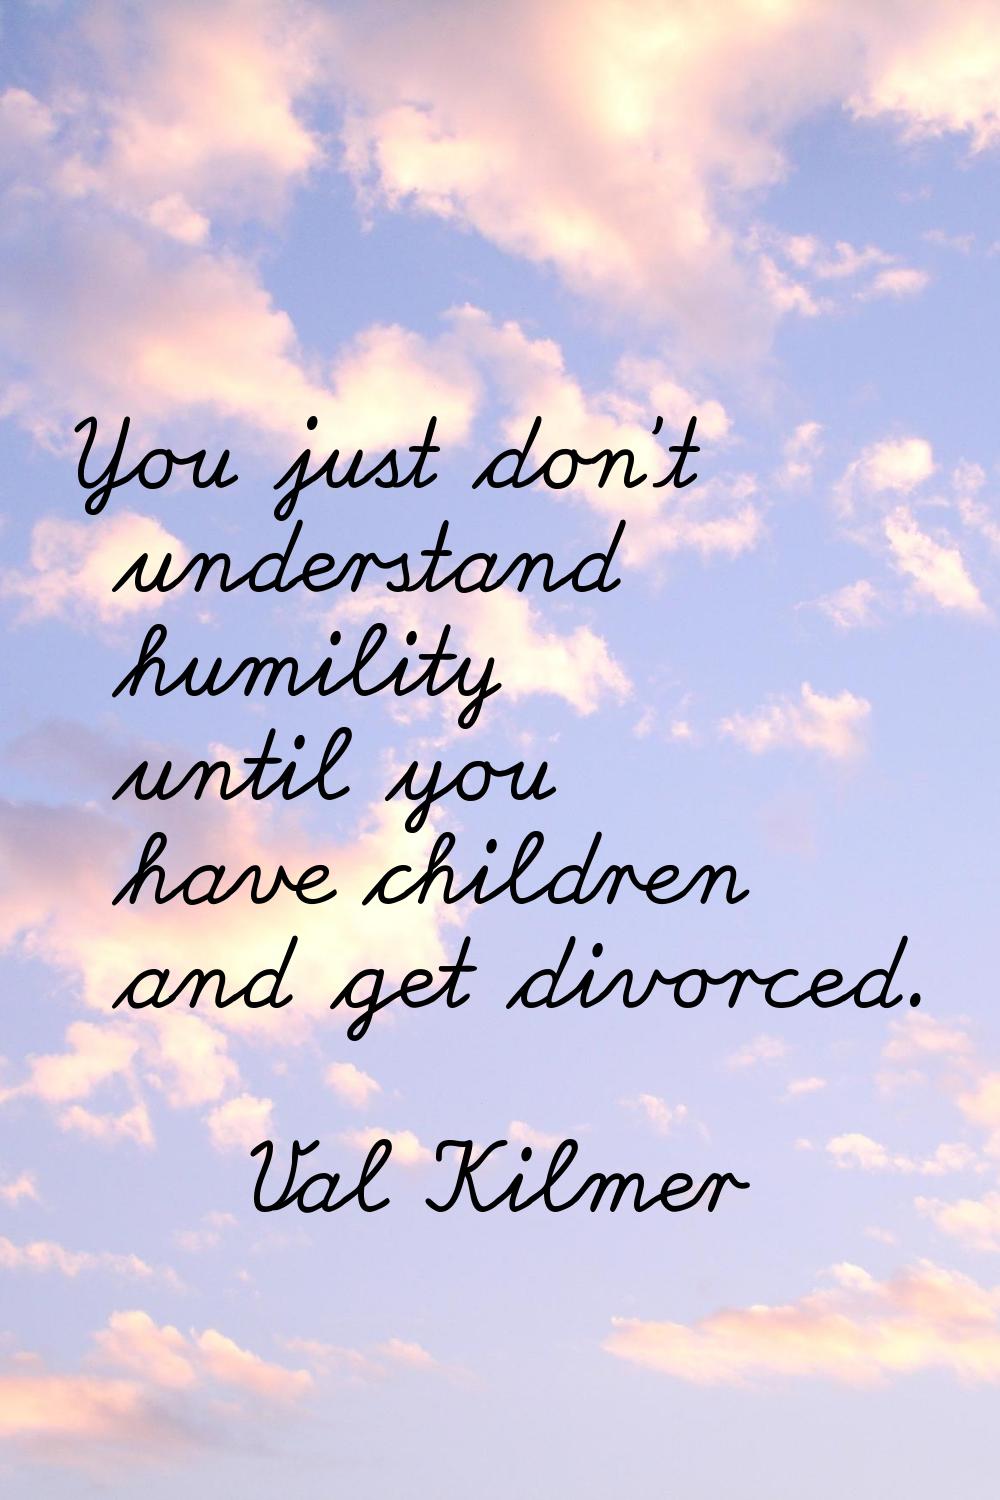 You just don't understand humility until you have children and get divorced.